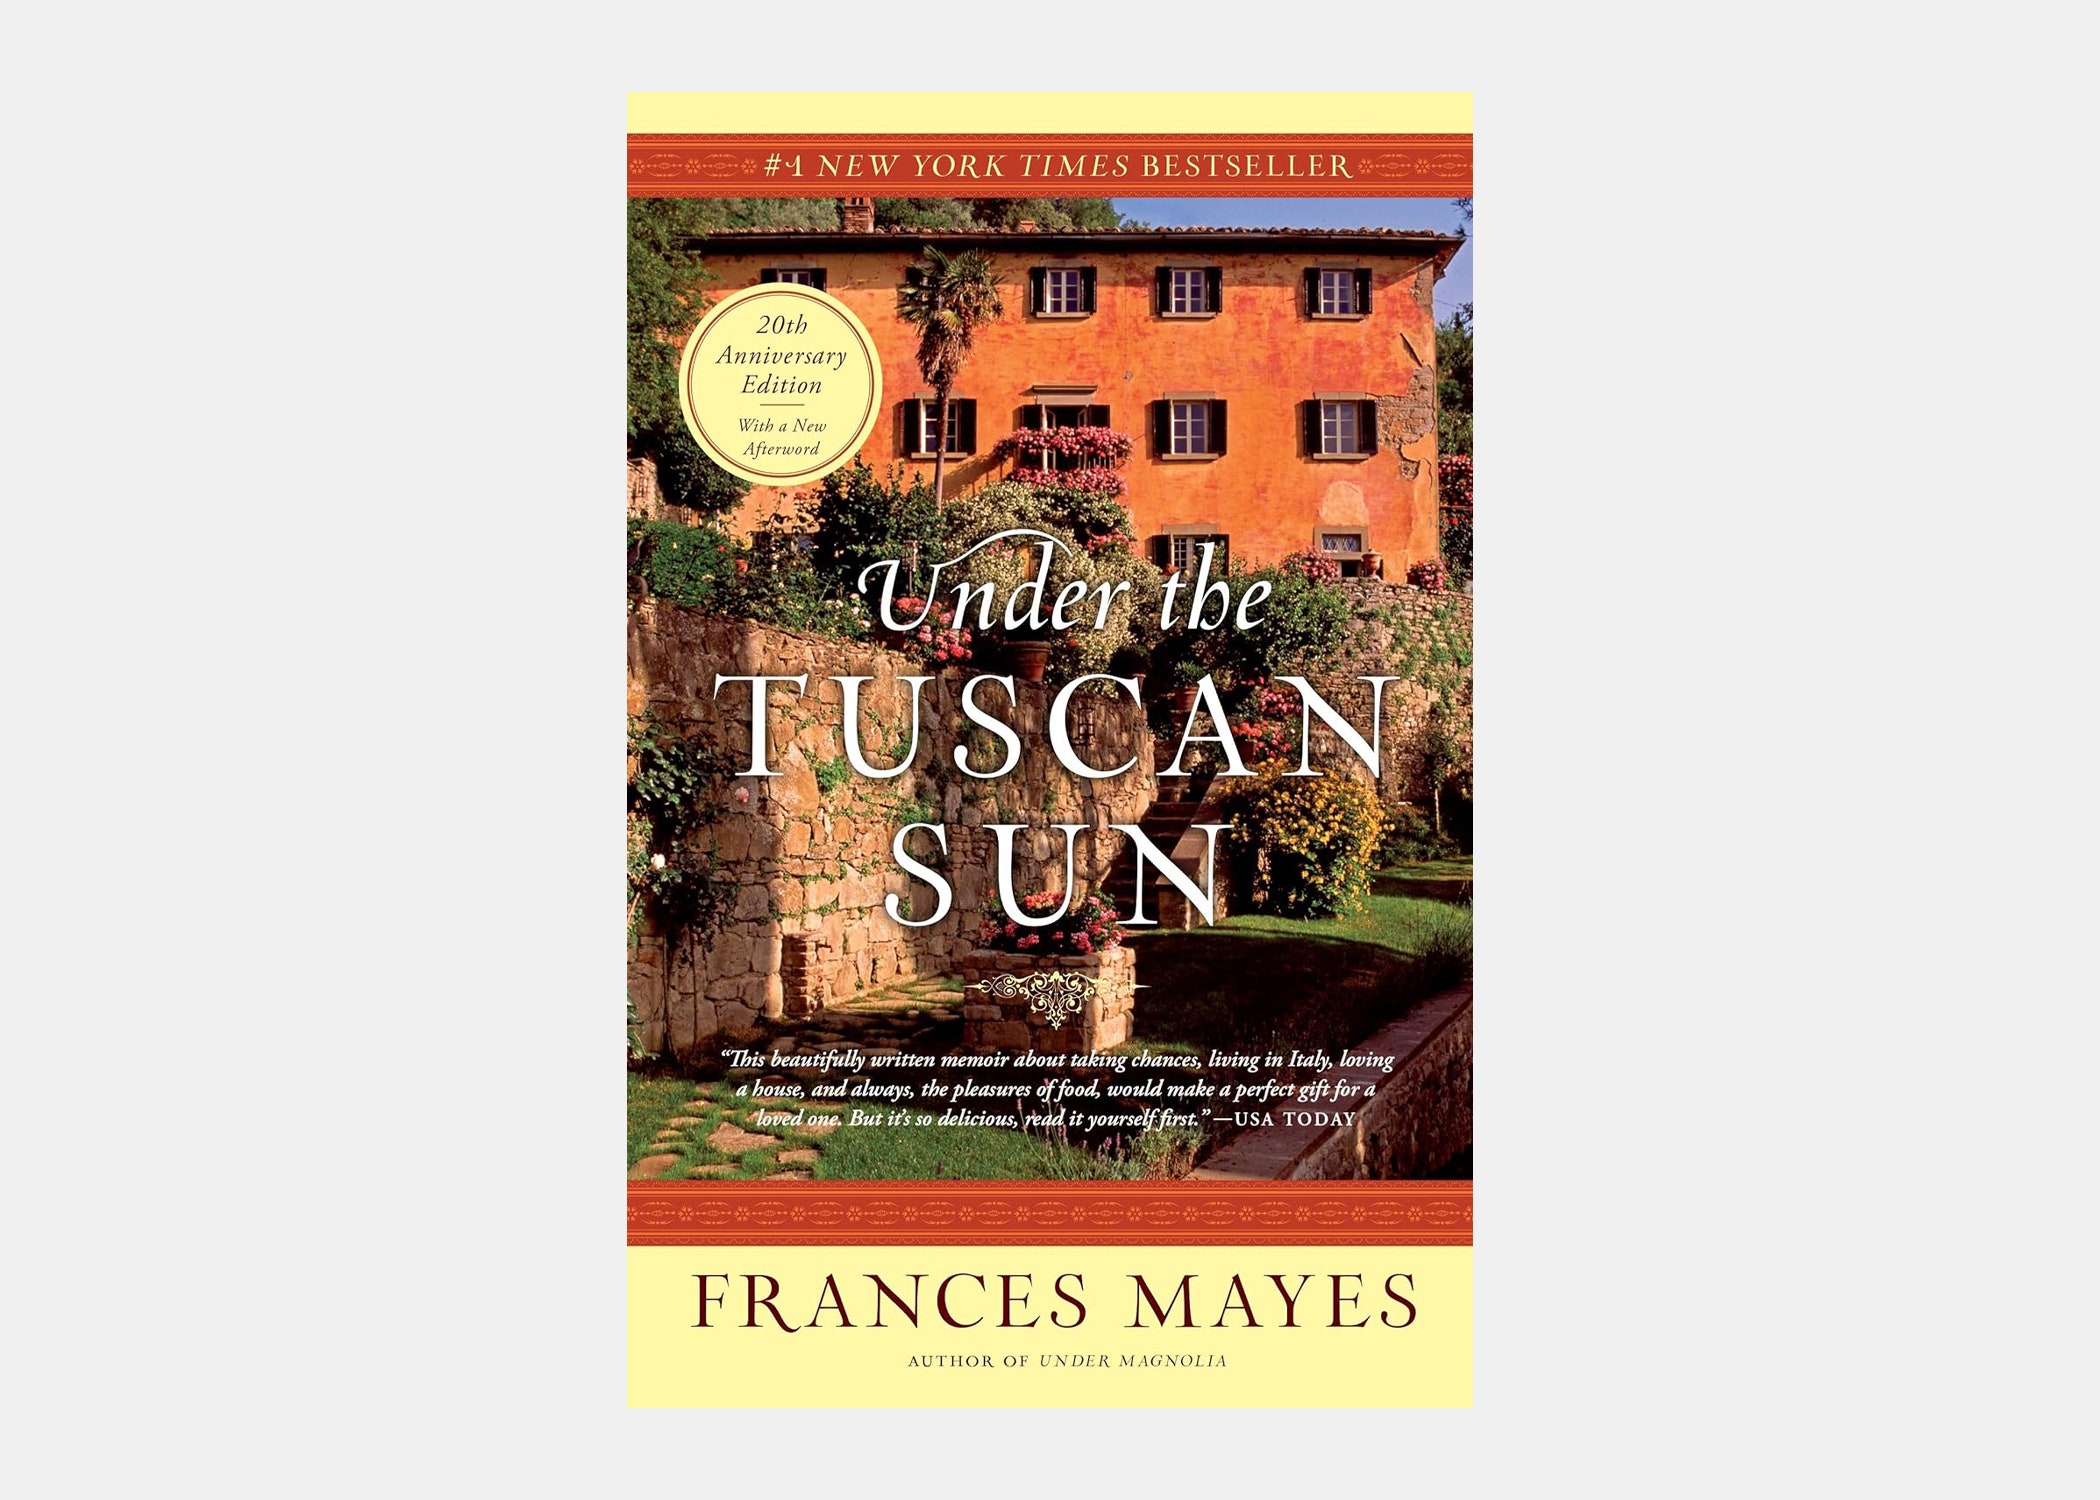 <p><strong>What it’s about:</strong> Yet another go-to-Italy-and-change-your-life classic, Frances Mayes’s memoir truly changed the game. I wouldn’t be surprised if this book—and the <a href="https://www.imdb.com/title/tt0328589/">2003 film adaptation</a>—are responsible for a sizable chunk of Italy’s GDP. But yes, this story has surely inspired many non-Italians to visit the cypress-studded Tuscan countryside, hoping to come upon a rundown villa in need of restoration and love, just as Mayes does in this travel writing classic.</p> <p><strong>The mood it’s giving:</strong> A leisurely walk through a Tuscan farmer’s market, where you come upon the most sweet-tart tomato you’ve ever had, its sun-bright juice coating your lips</p> <p><strong>The book’s first line:</strong> “‘What are you growing here?’ The upholsterer lugs an armchair up the walkway to the house but his quick eyes are on the land.”</p> $11, Amazon. <a href="https://www.amazon.com/Under-Tuscan-Sun-Home-Italy/dp/0767900383/ref=sr_1_1?crid=ID25I7DZ1VBD&keywords=Under+the+Tuscan+Sun%3A+At+Home+in+Italy+by+Frances+Mayes&qid=1698282150&s=books&sprefix=under+the+tuscan+sun+at+home+in+italy+by+frances+mayes%2Cstripbooks%2C132&sr=1-1">Get it now!</a><p>Sign up to receive the latest news, expert tips, and inspiration on all things travel</p><a href="https://www.cntraveler.com/newsletter/the-daily?sourceCode=msnsend">Inspire Me</a>